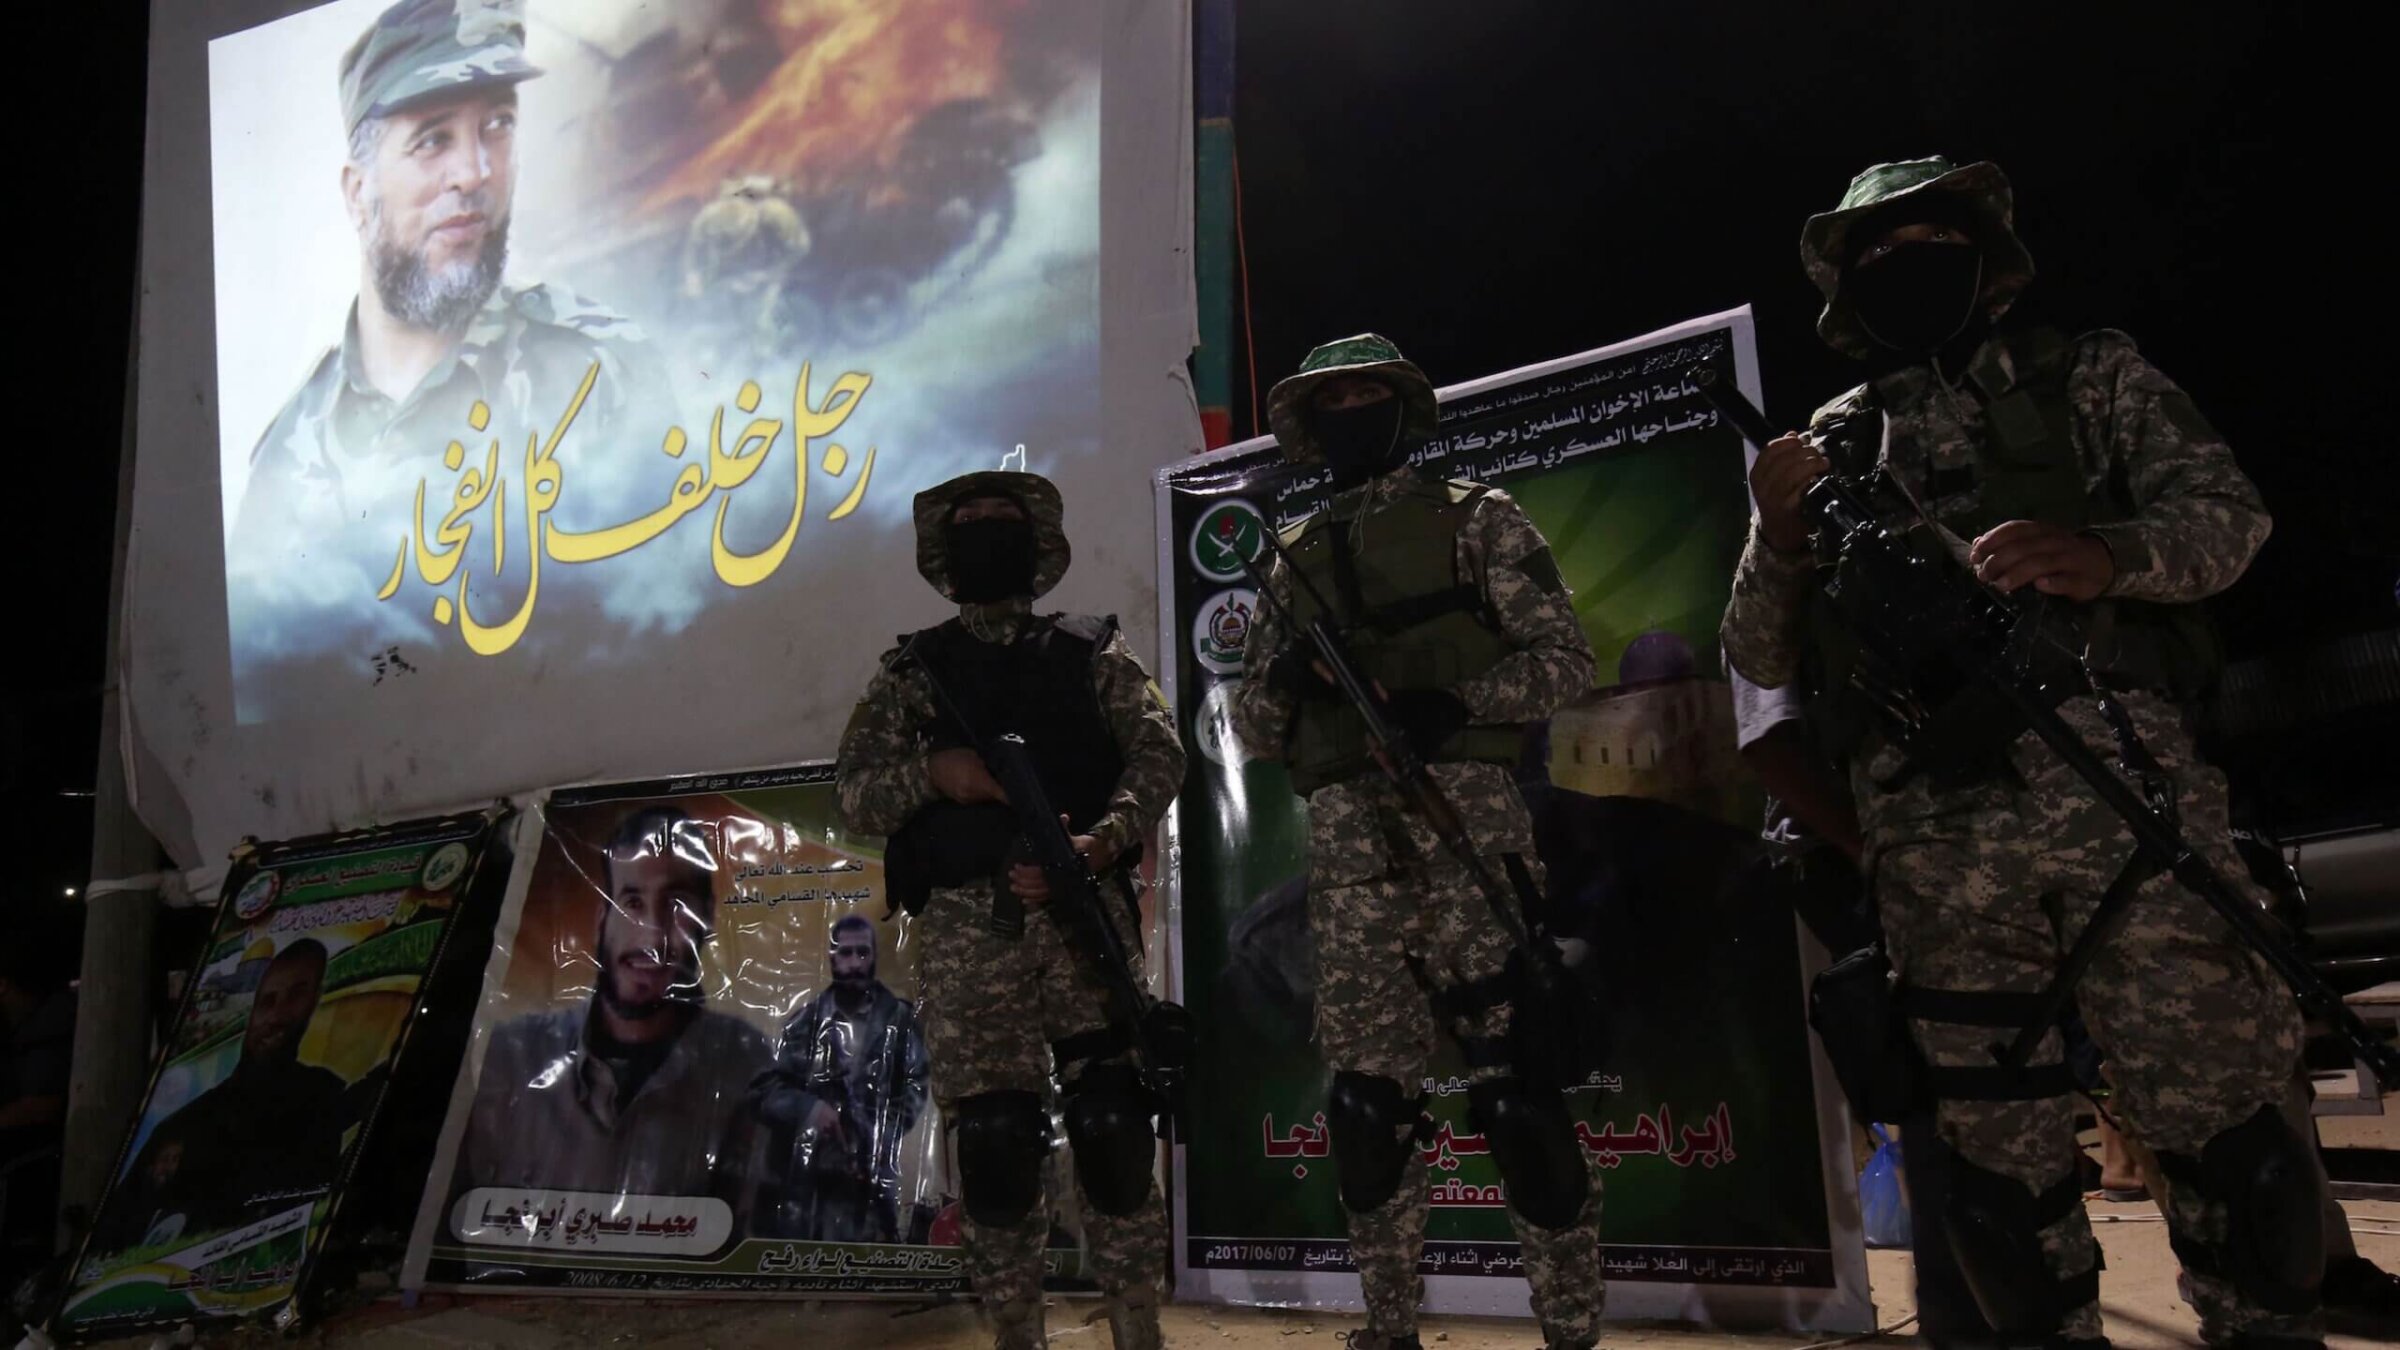 Fighters from the Ezzedine al-Qassam Brigades, the armed wing of the Palestinian Hamas movement, attend a memorial service in the Gaza Strip in 2017.  